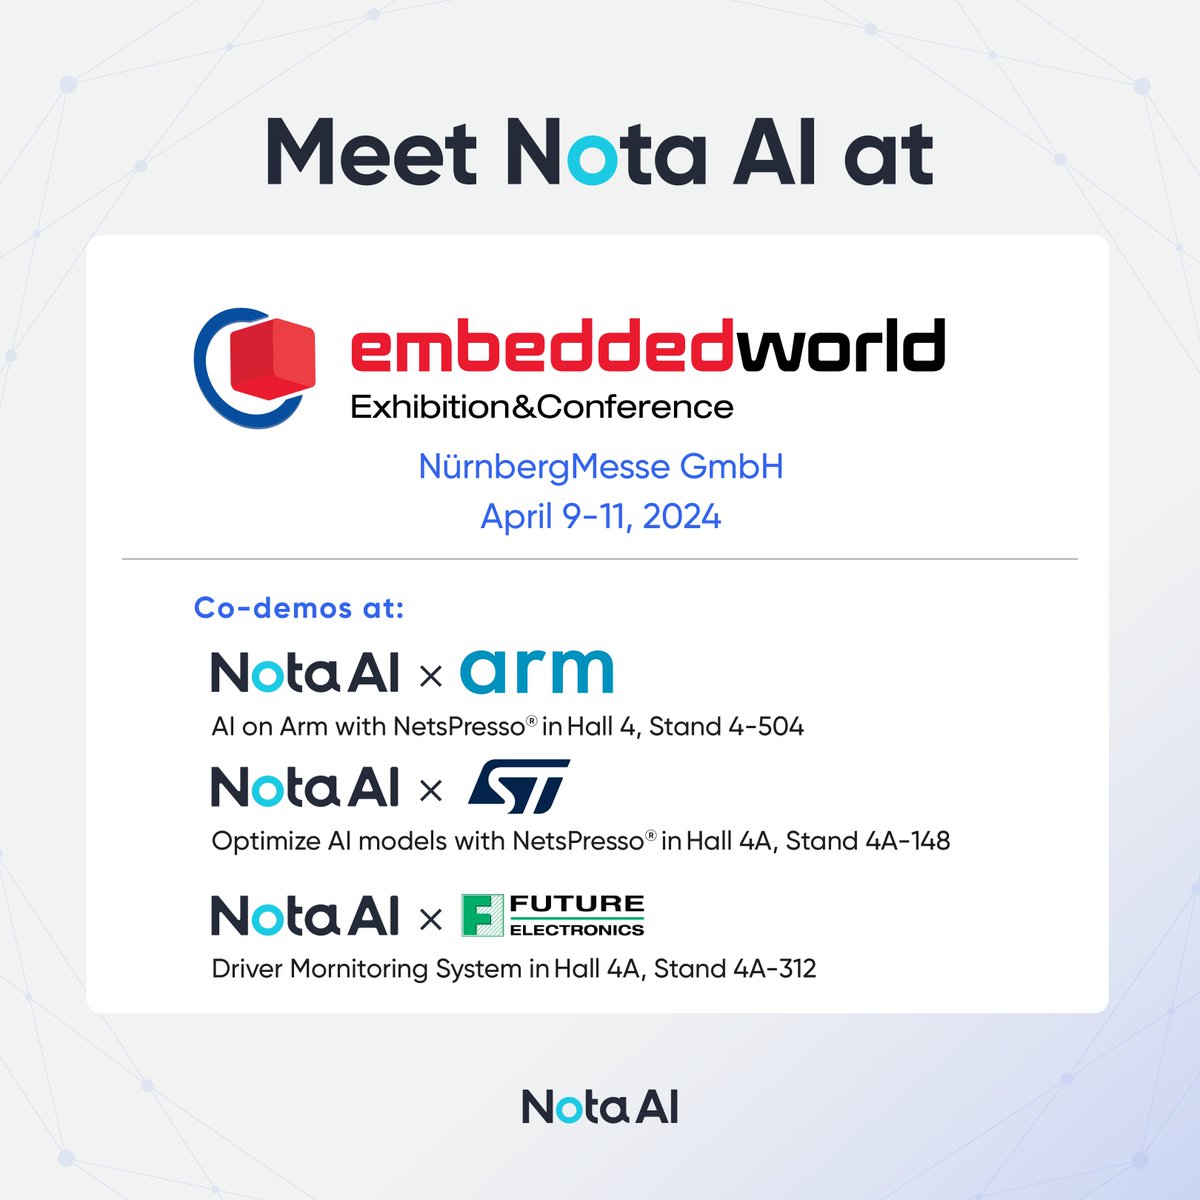 📢 #NotaAI is gearing up for #EmbeddedWorld 2024! We're teaming up with our partners, #Arm, #ST, and #FutureElectronics! 🙌🏻 Don't miss out on our collaborative demos, where you can experience our cutting-edge AI optimization technology across various platforms. See you there! 👋🏻